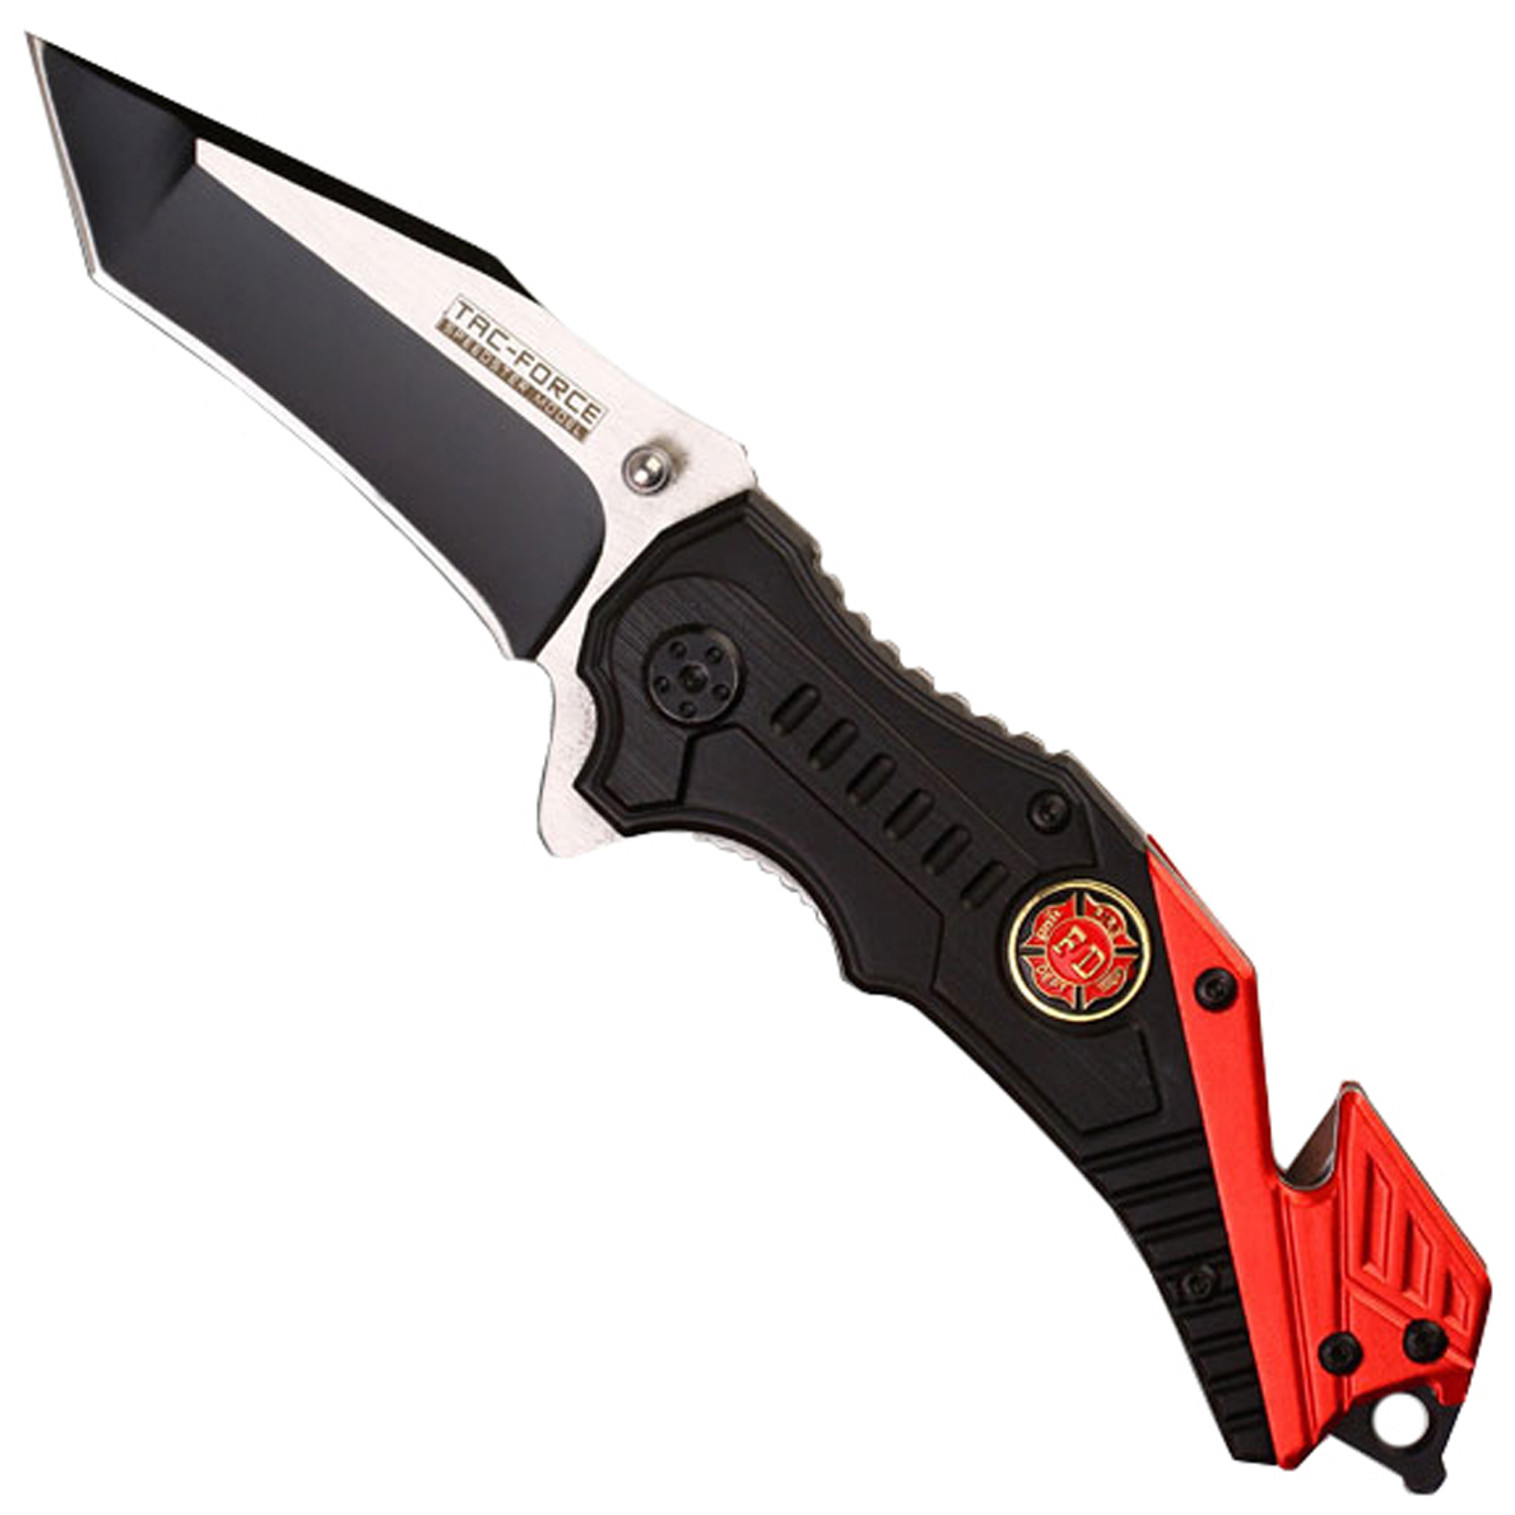 Tac-Force Rescue Stainless Steel Blade Folding Knife - Red